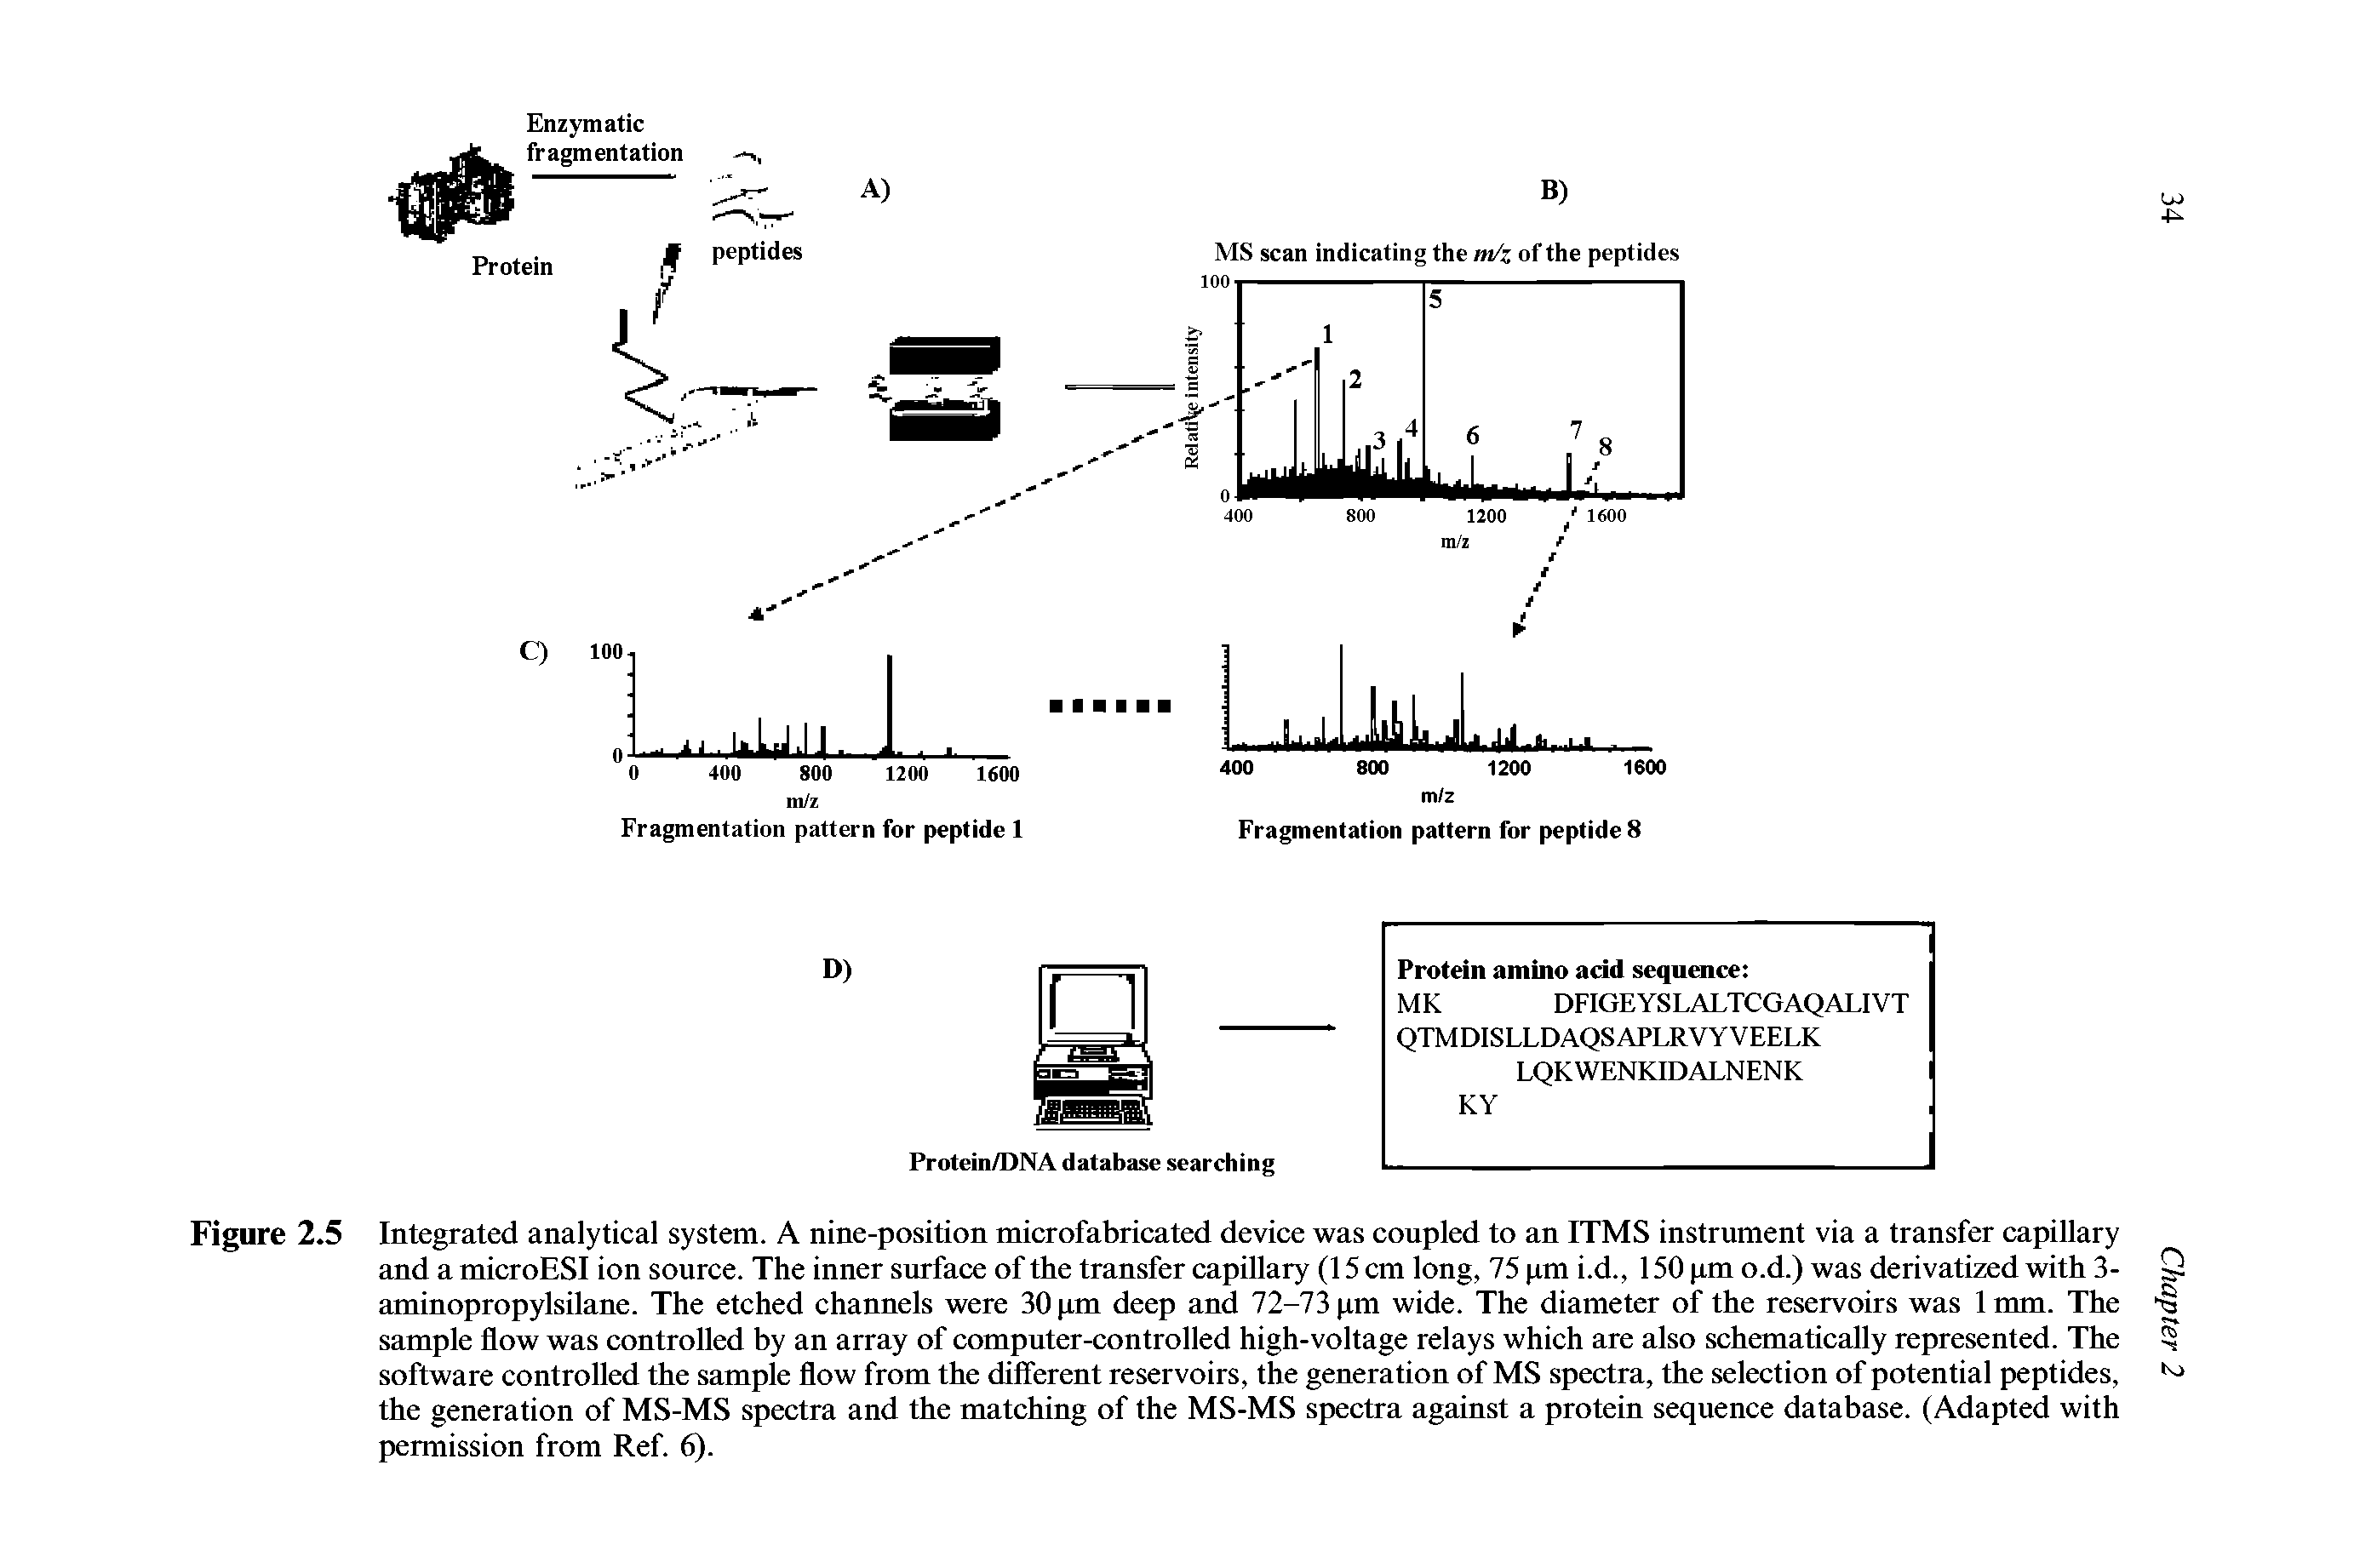 Figure 2.5 Integrated analytical system. A nine-position microfabricated device was coupled to an ITMS instrument via a transfer capillary and a microESI ion source. The inner surface of the transfer capillary (15 cm long, 75 pm i.d., 150 pm o.d.) was derivatized with 3-aminopropylsilane. The etched channels were 30 pm deep and 72-73 pm wide. The diameter of the reservoirs was 1mm. The sample flow was controlled by an array of computer-controlled high-voltage relays which are also schematically represented. The software controlled the sample flow from the different reservoirs, the generation of MS spectra, the selection of potential peptides, the generation of MS-MS spectra and the matching of the MS-MS spectra against a protein sequence database. (Adapted with permission from Ref. 6).